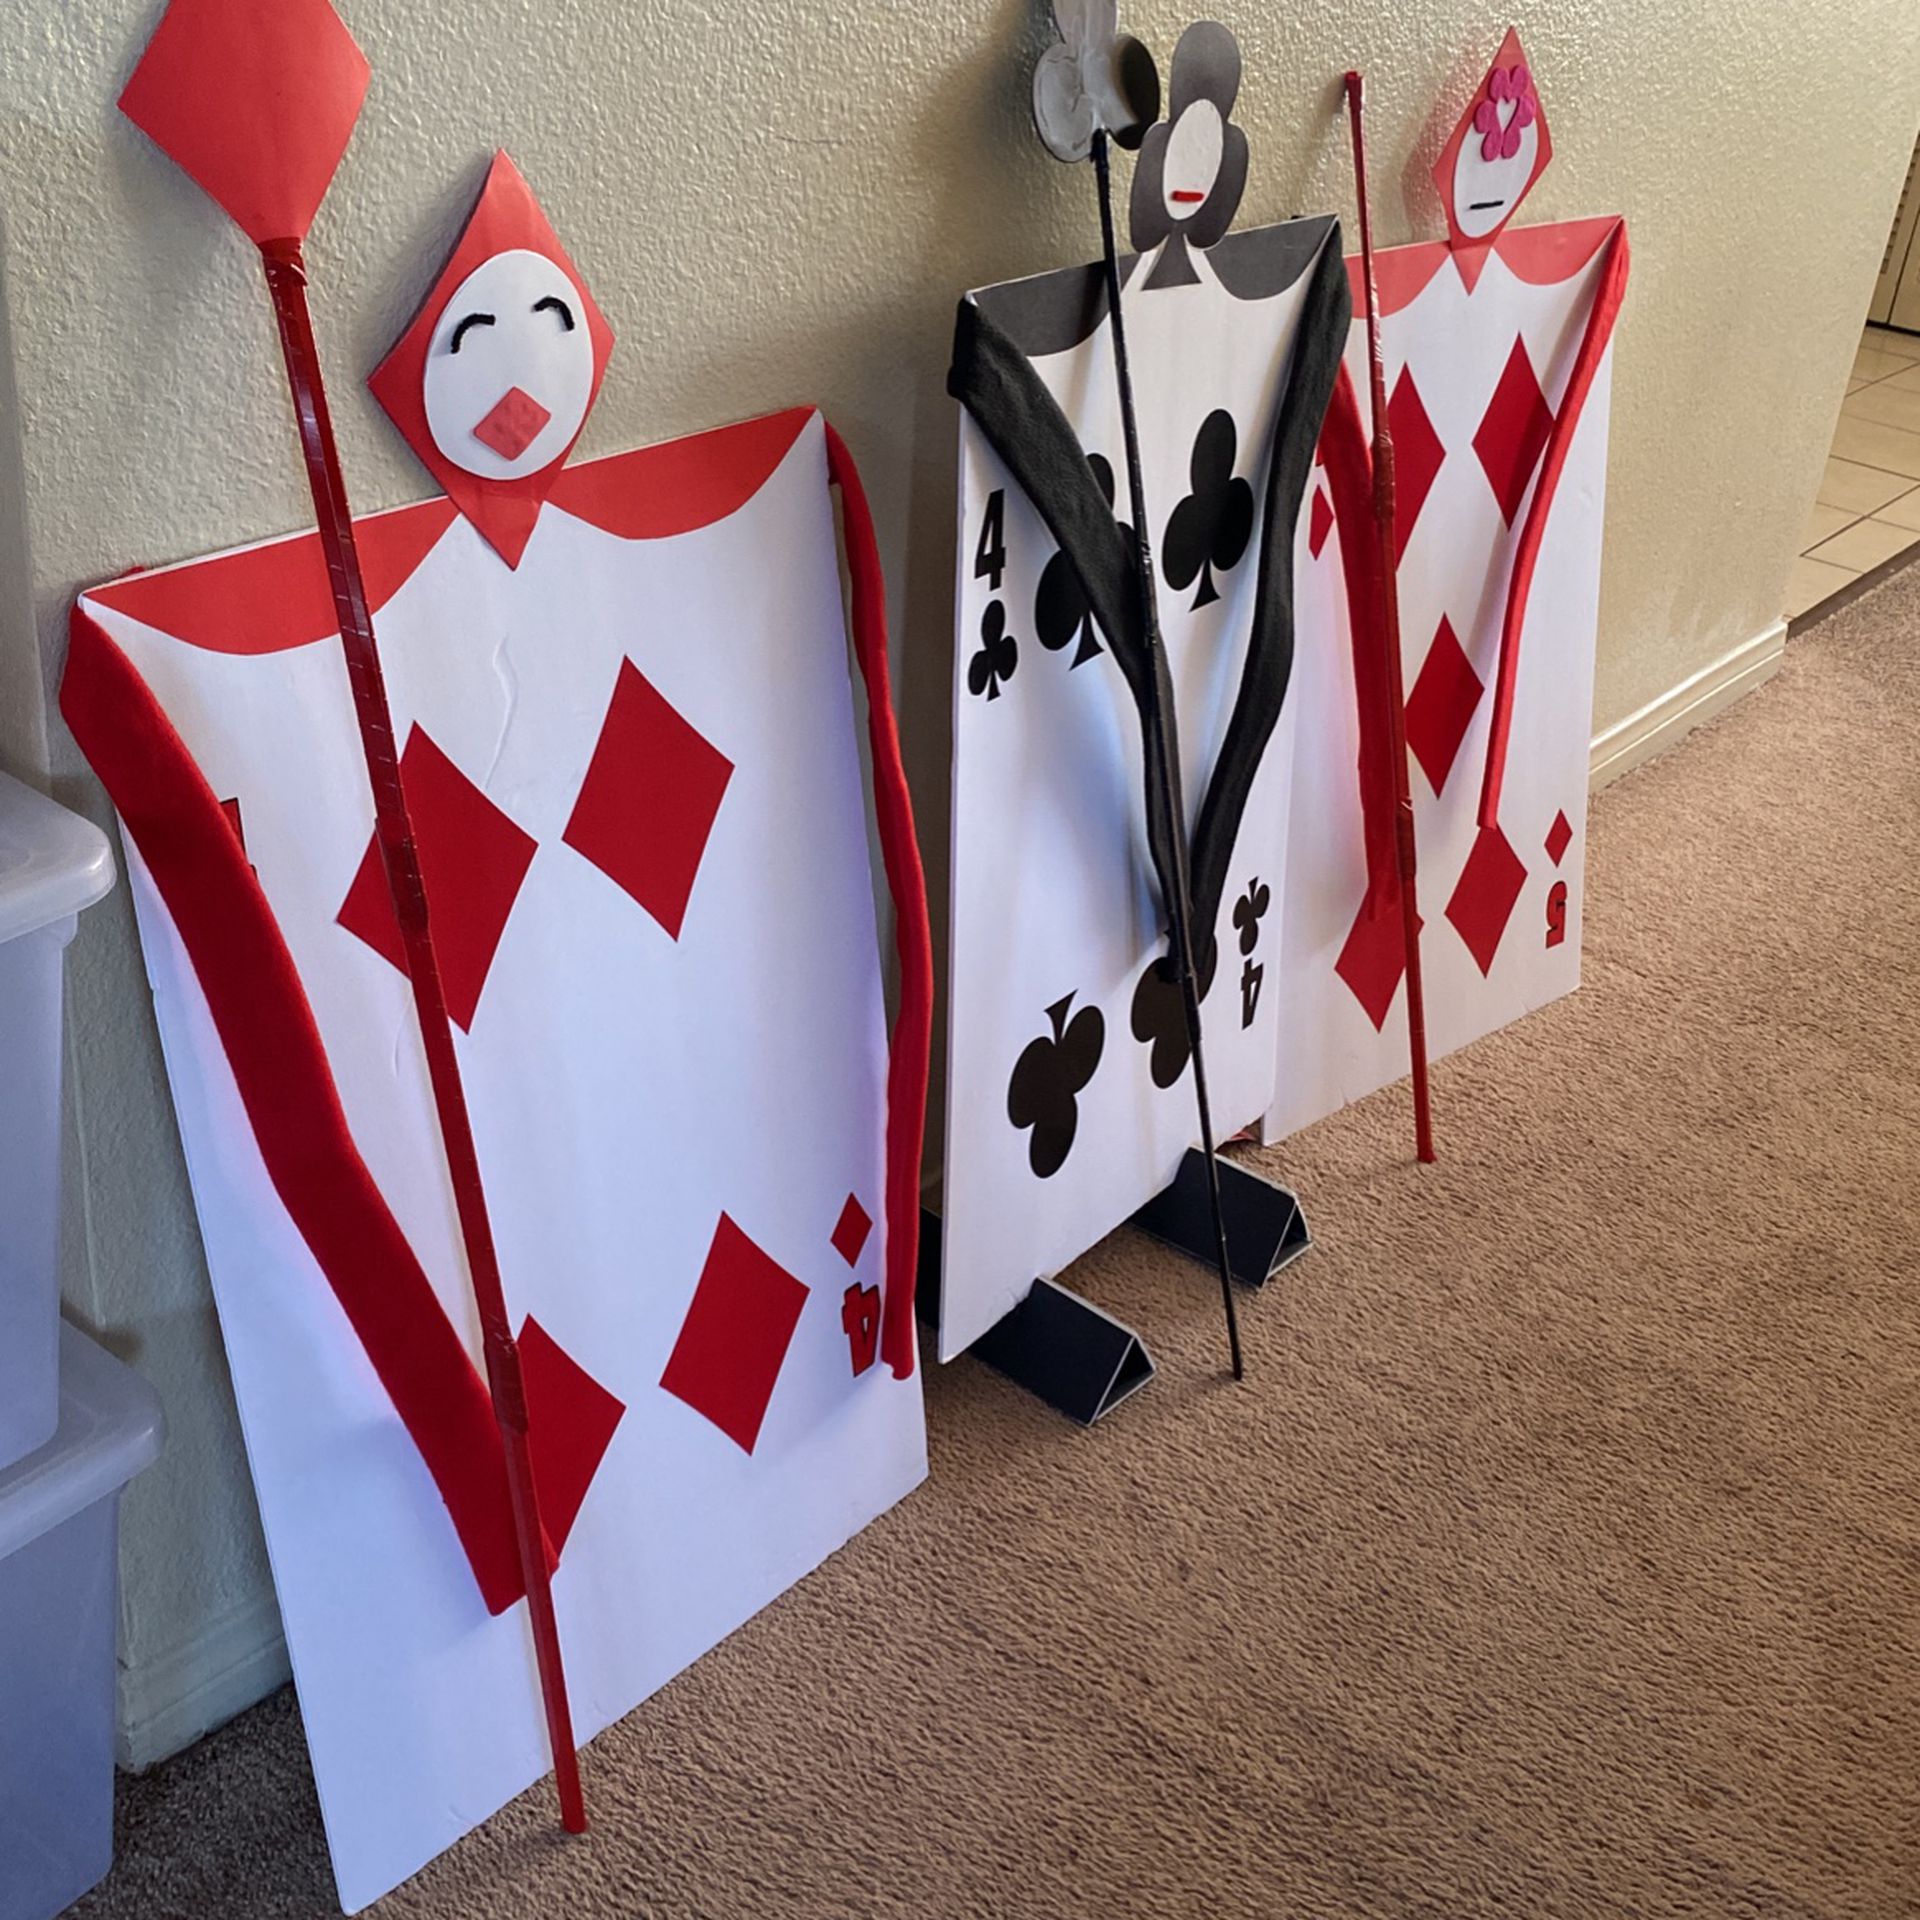 3 Foot Posterboard Size, Decorations, Soldiers, With Spears From Alice In Wonderland